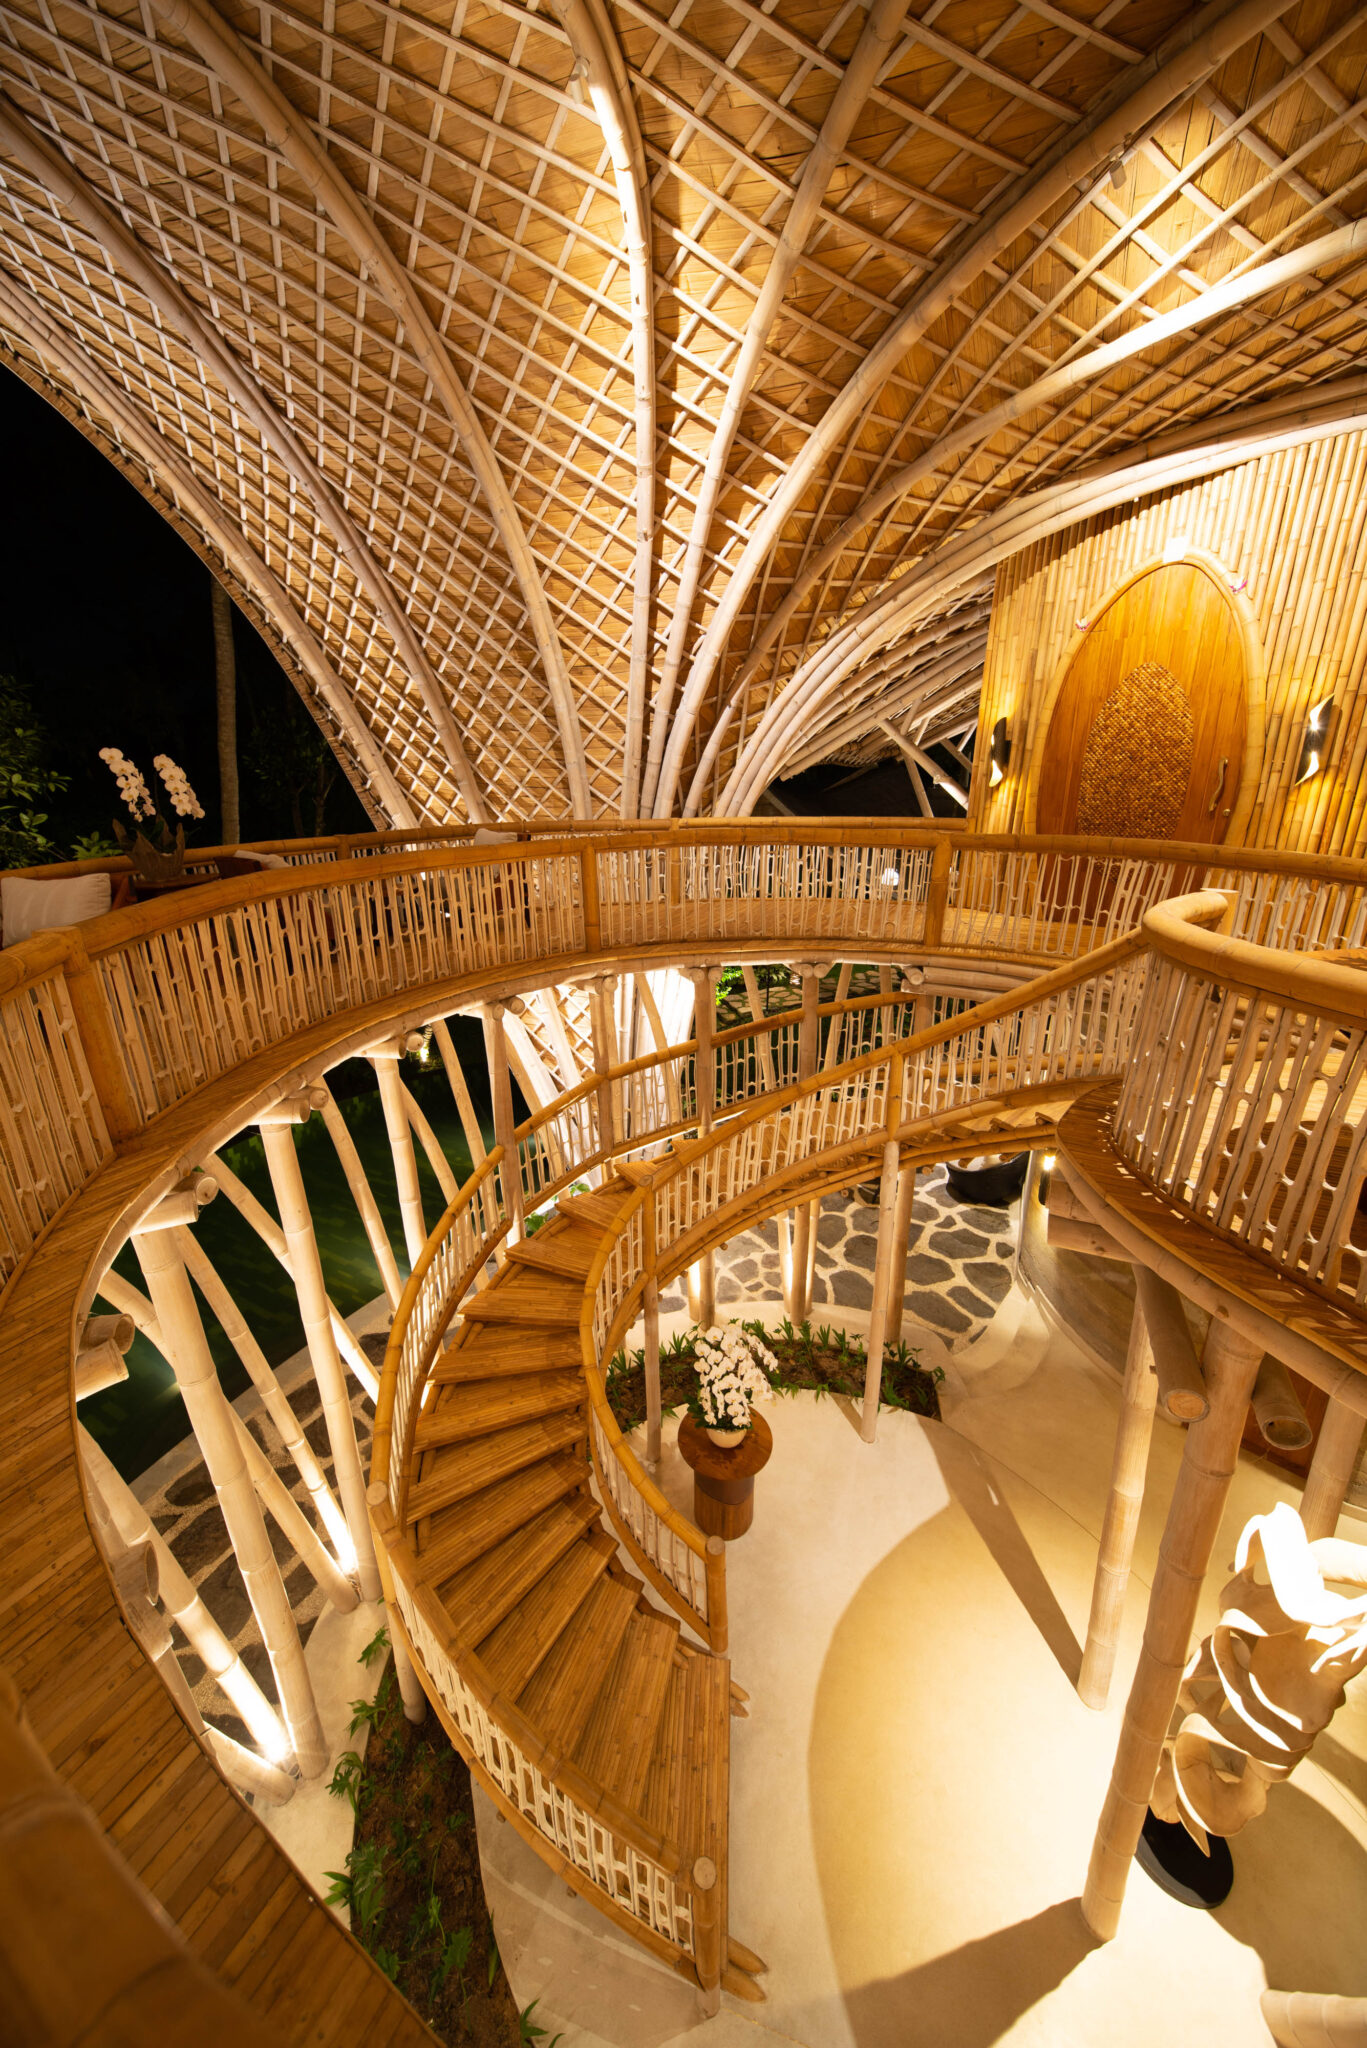 https://inspiralarchitects.com/wp-content/uploads/2023/02/spiral-staircase-bamboo.jpg